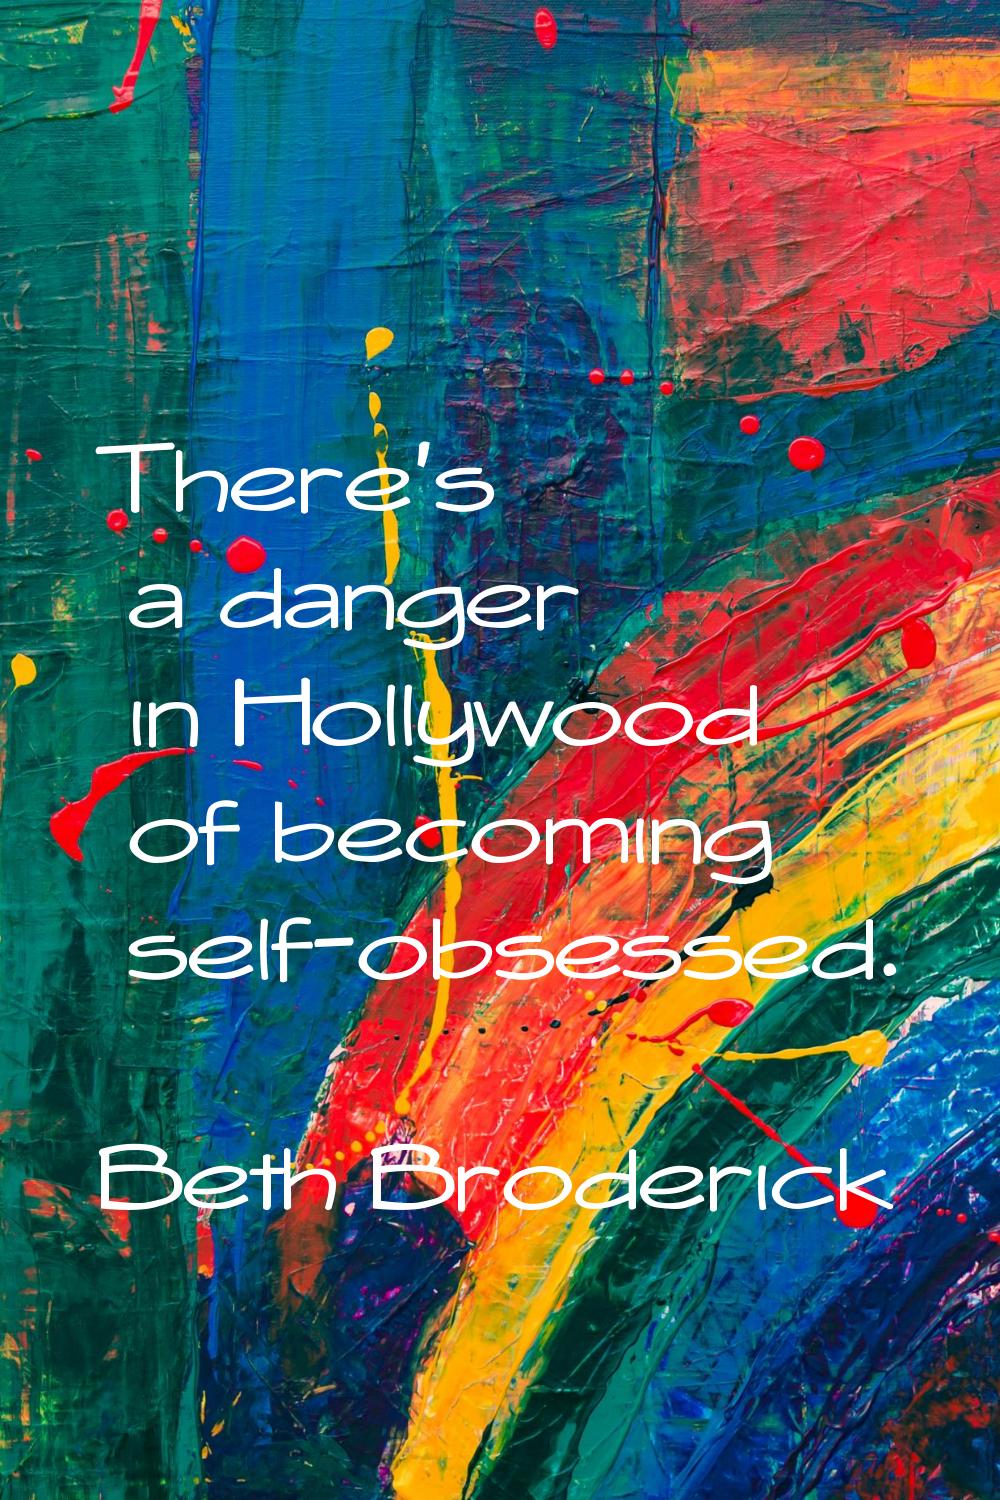 There's a danger in Hollywood of becoming self-obsessed.